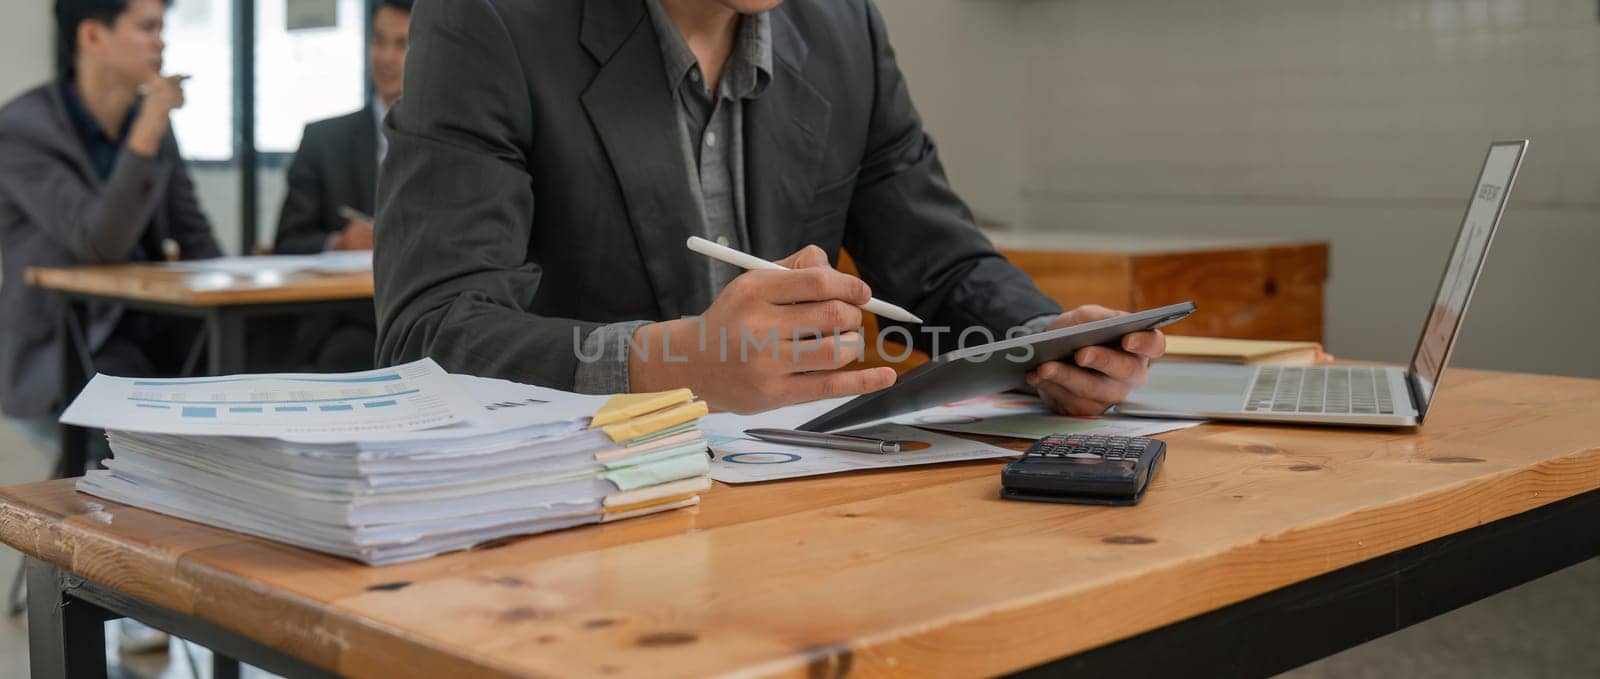 Business accounting concept, Business man using calculator with computer laptop and tablet in office by nateemee